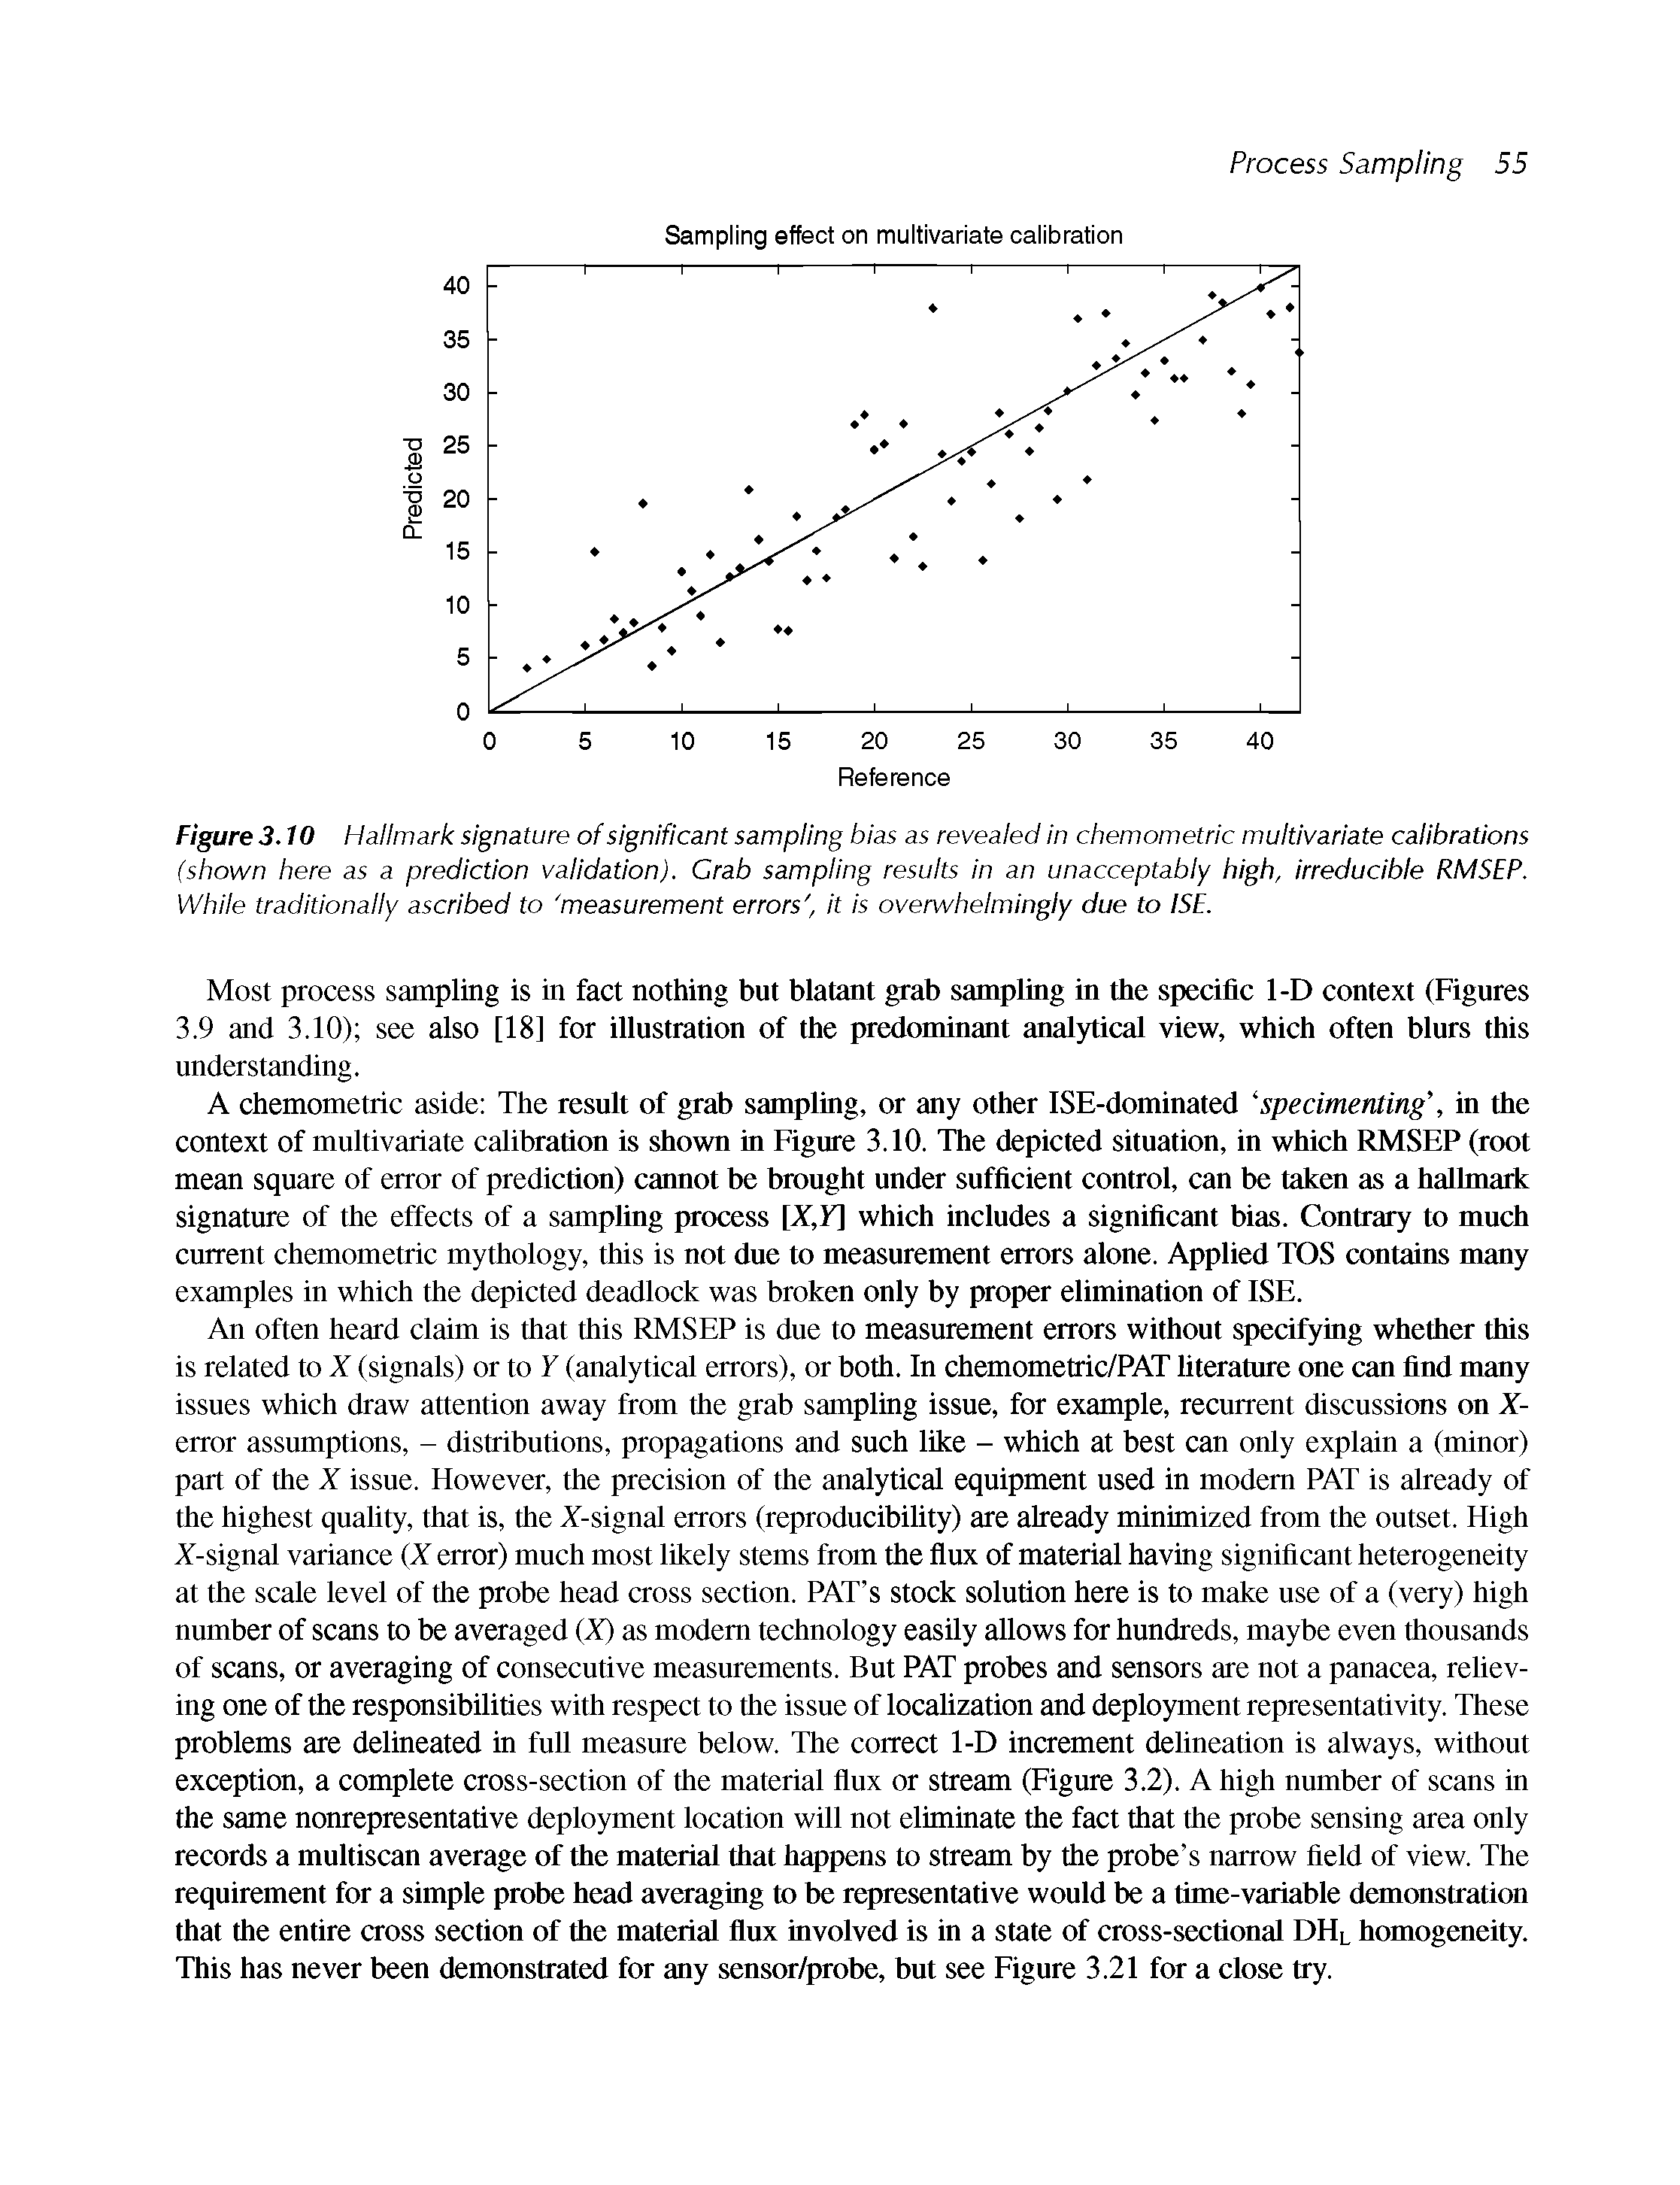 Figure 3.10 Hallmark signature of significant sampling bias as revealed in chemometric multivariate calibrations (shown here as a prediction validation). Crab sampling results in an unacceptably high, irreducible RMSEP. While traditionally ascribed to measurement errors, it is overwhelmingly due to ISE.